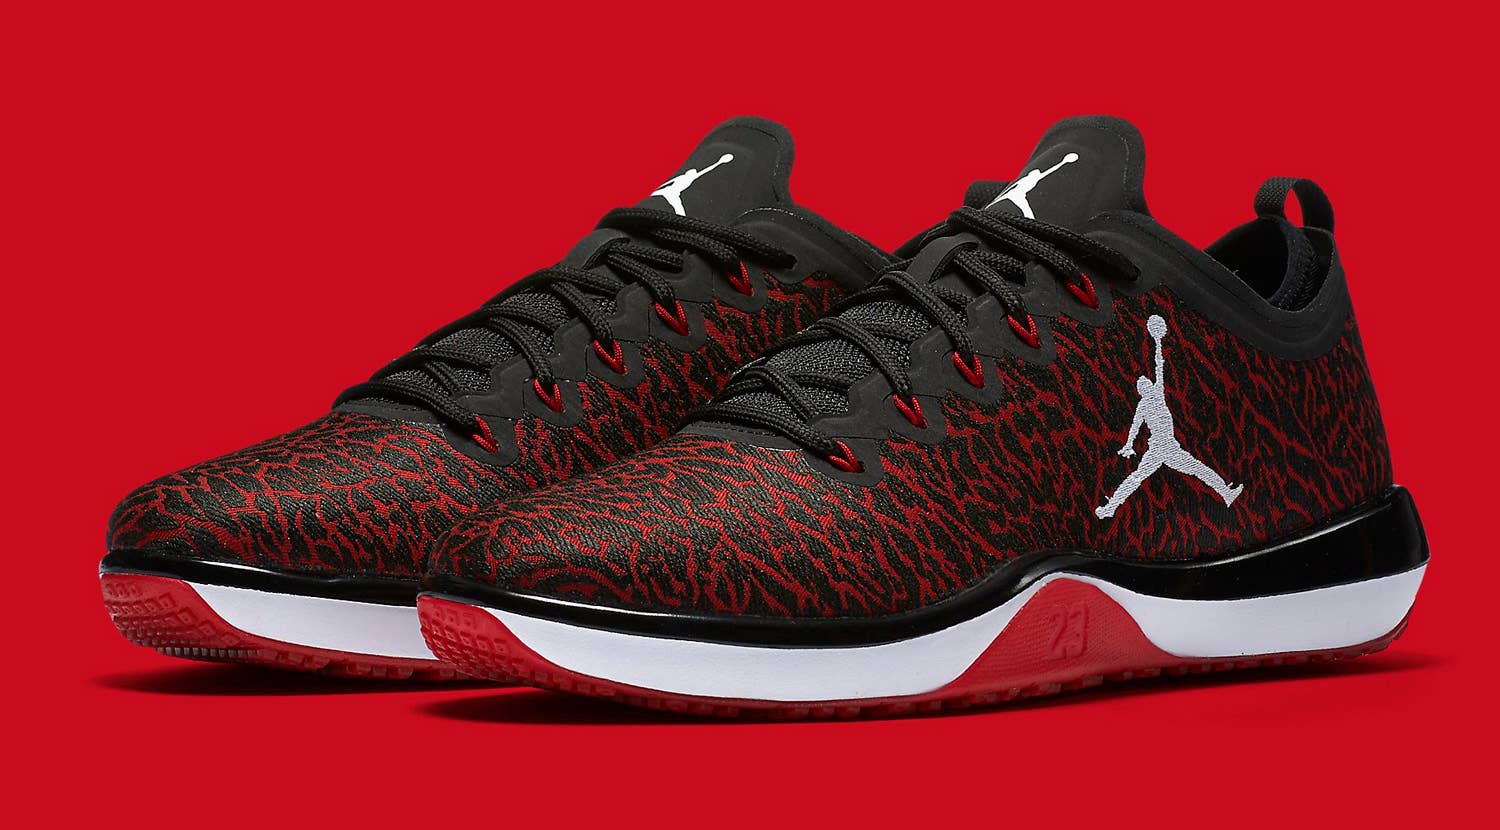 heks badning Særlig There's Another "Banned" Air Jordan Releasing | Complex